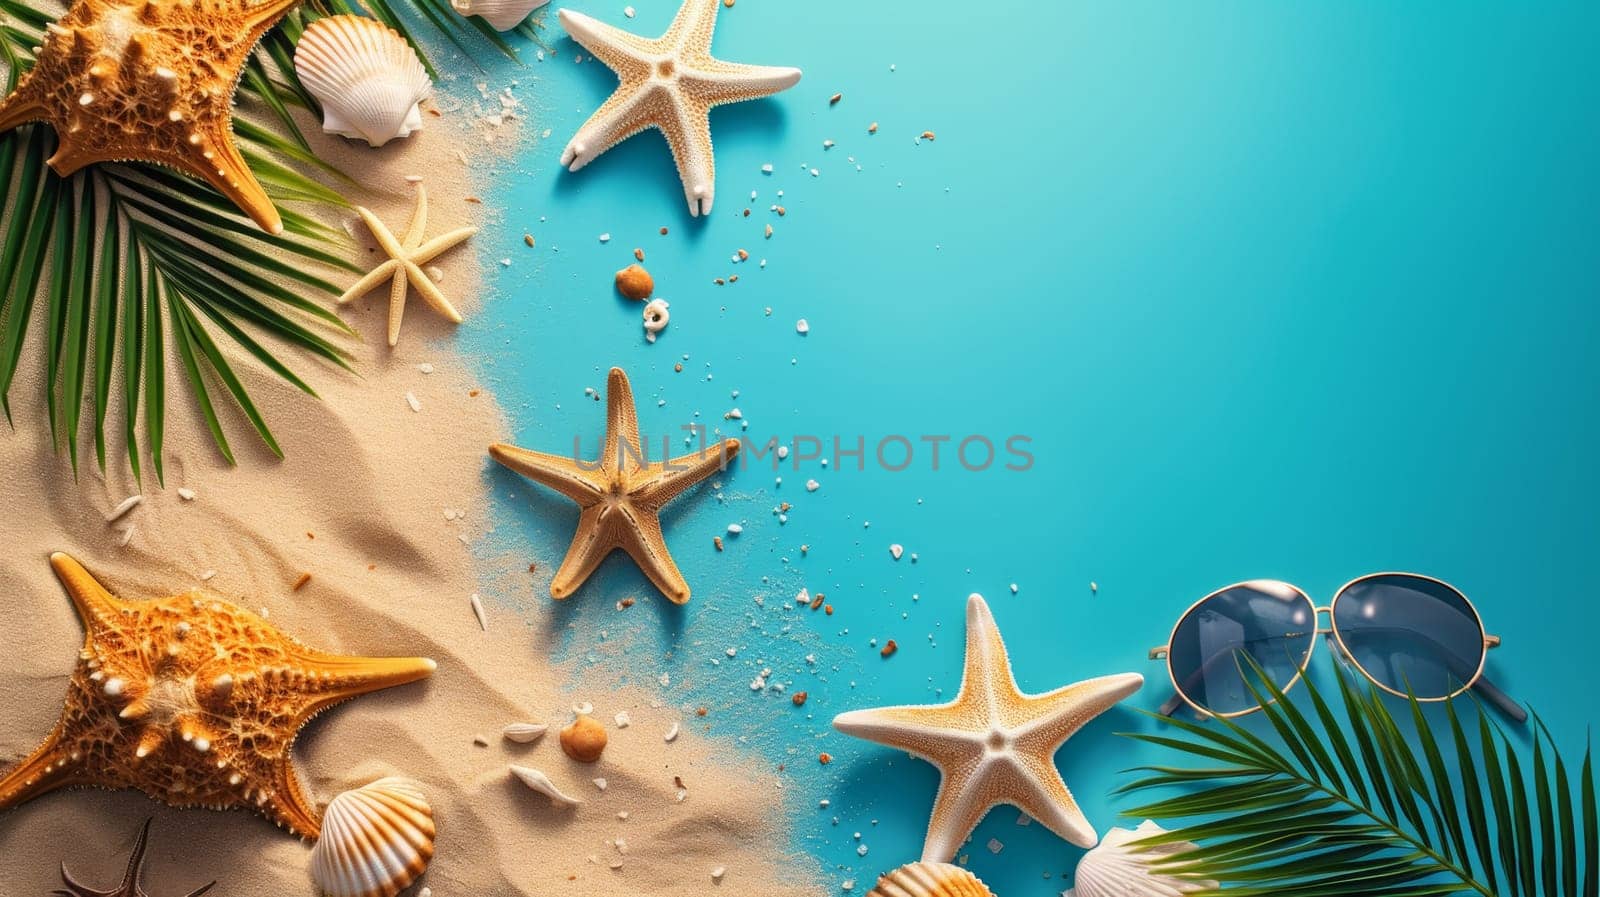 A beach scene with sunglasses and starfish on a blue background